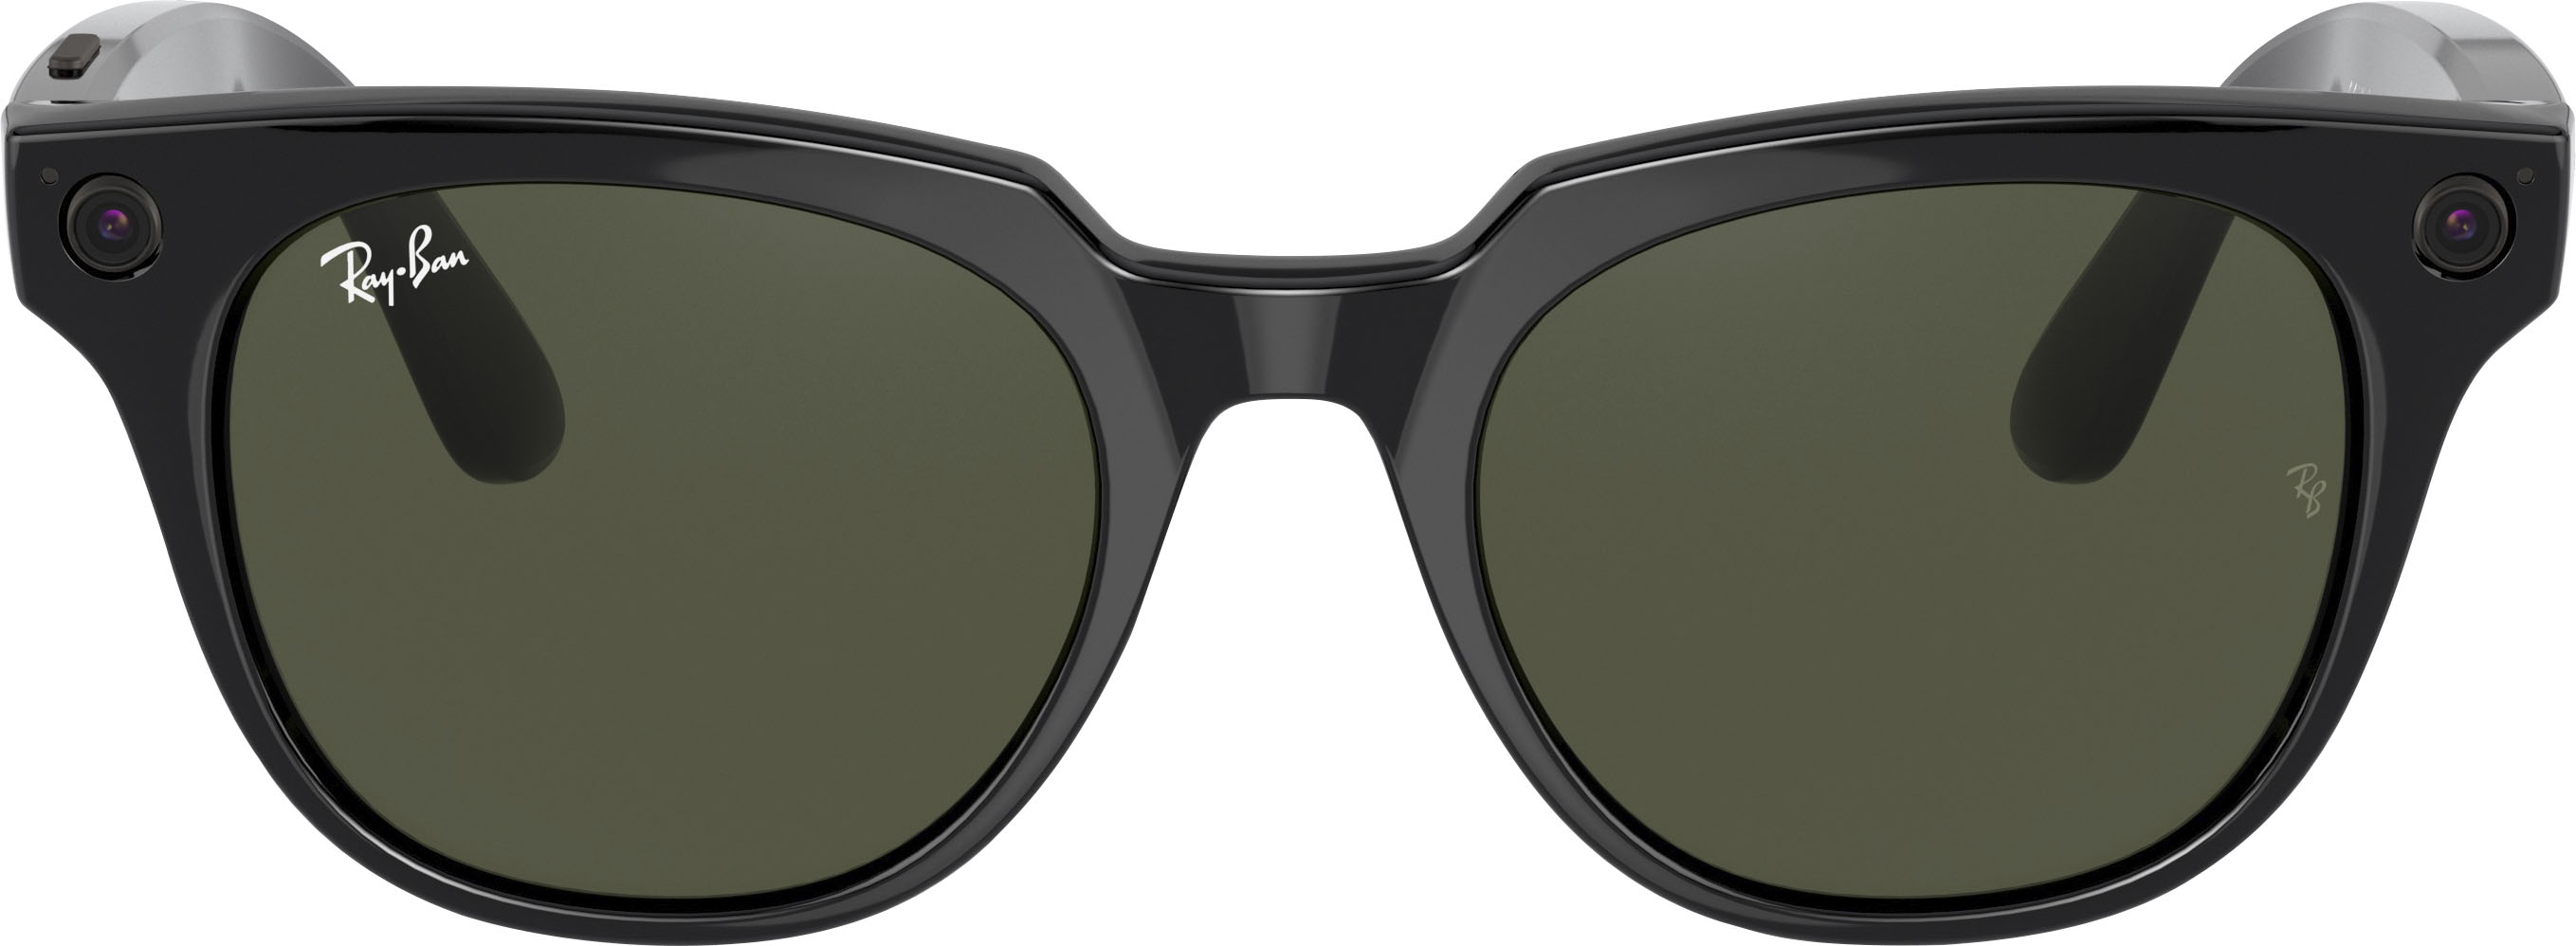 Zoom In On Angle Zoom. Ray-Ban - Stories Meteor Smart Glasses - Shiny Black/Green.